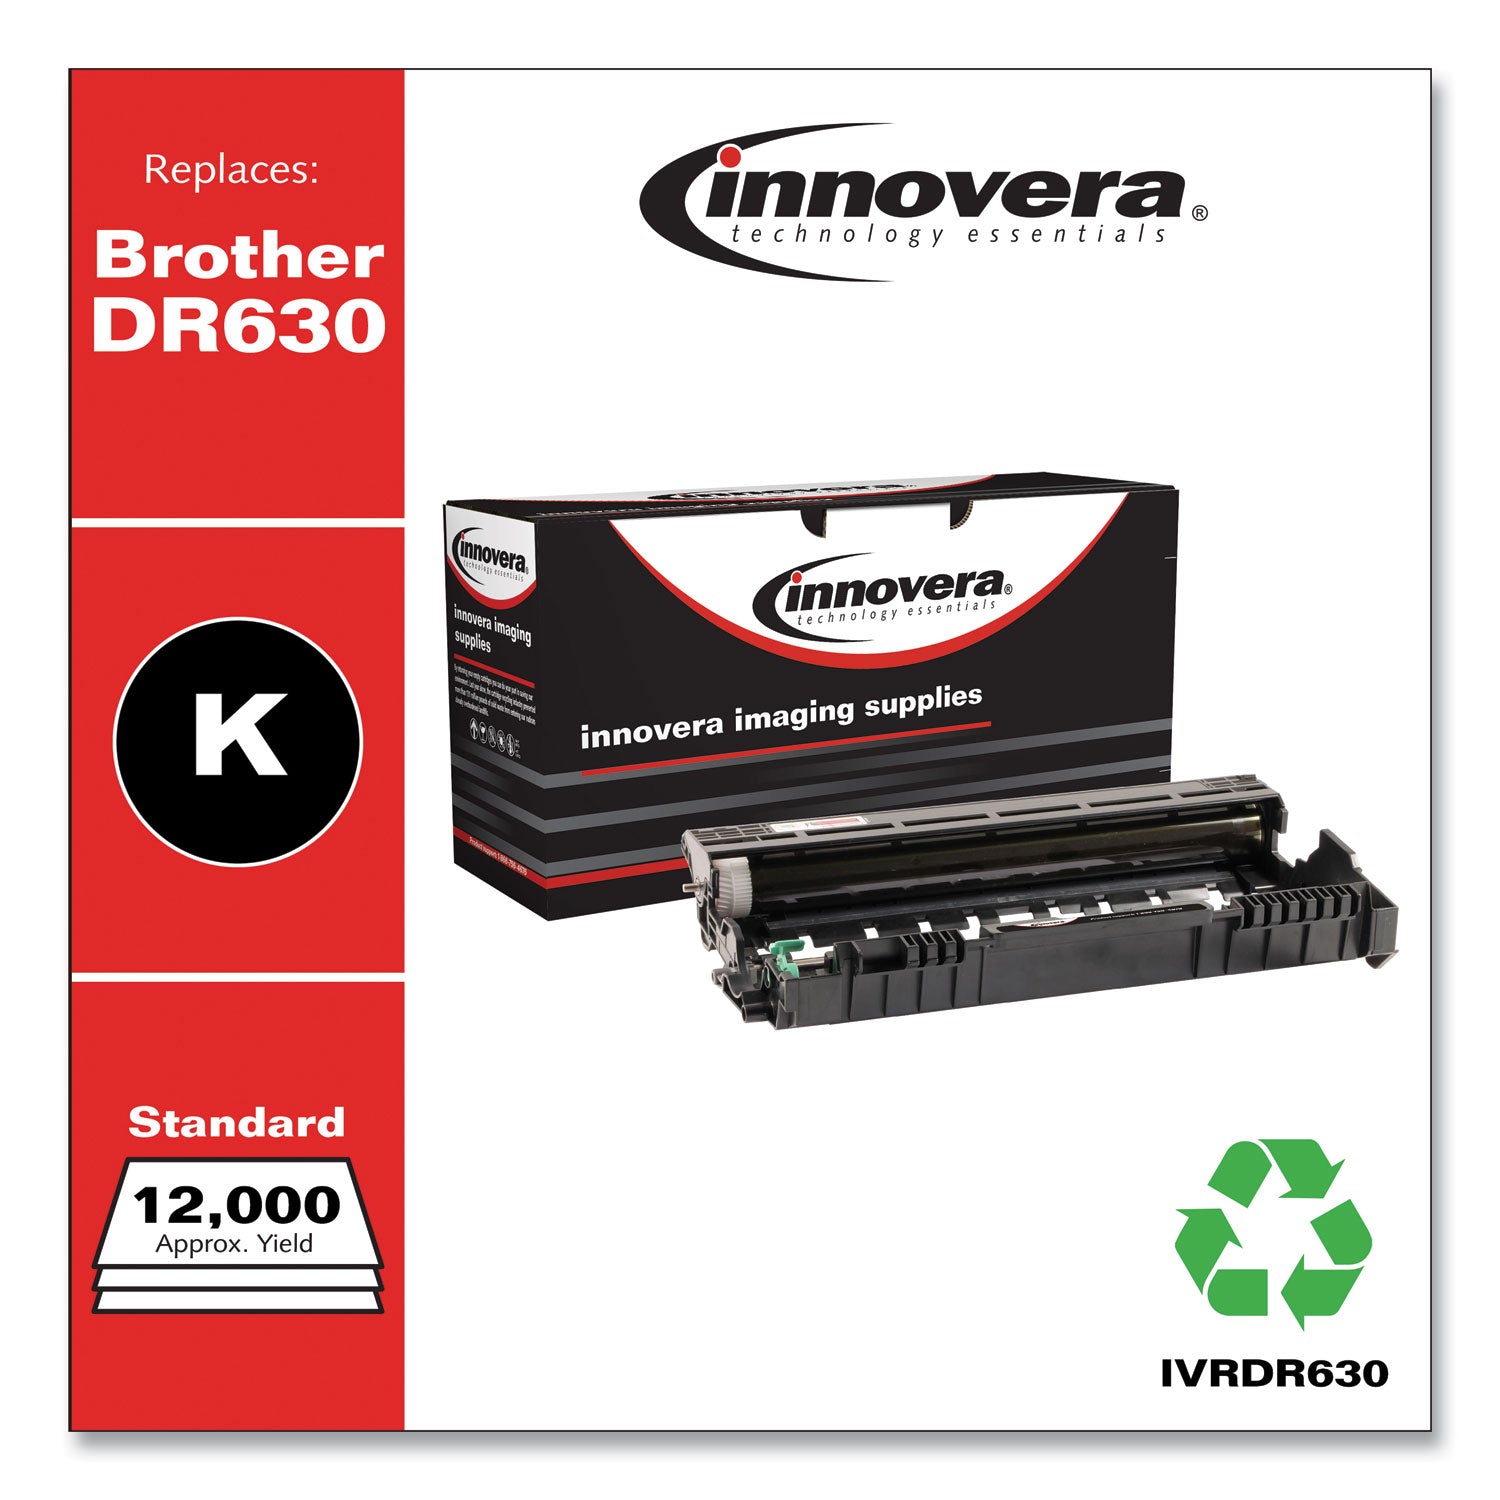 remanufactured-black-drum-unit-replacement-for-dr630-12000-page-yield_ivrdr630 - 2